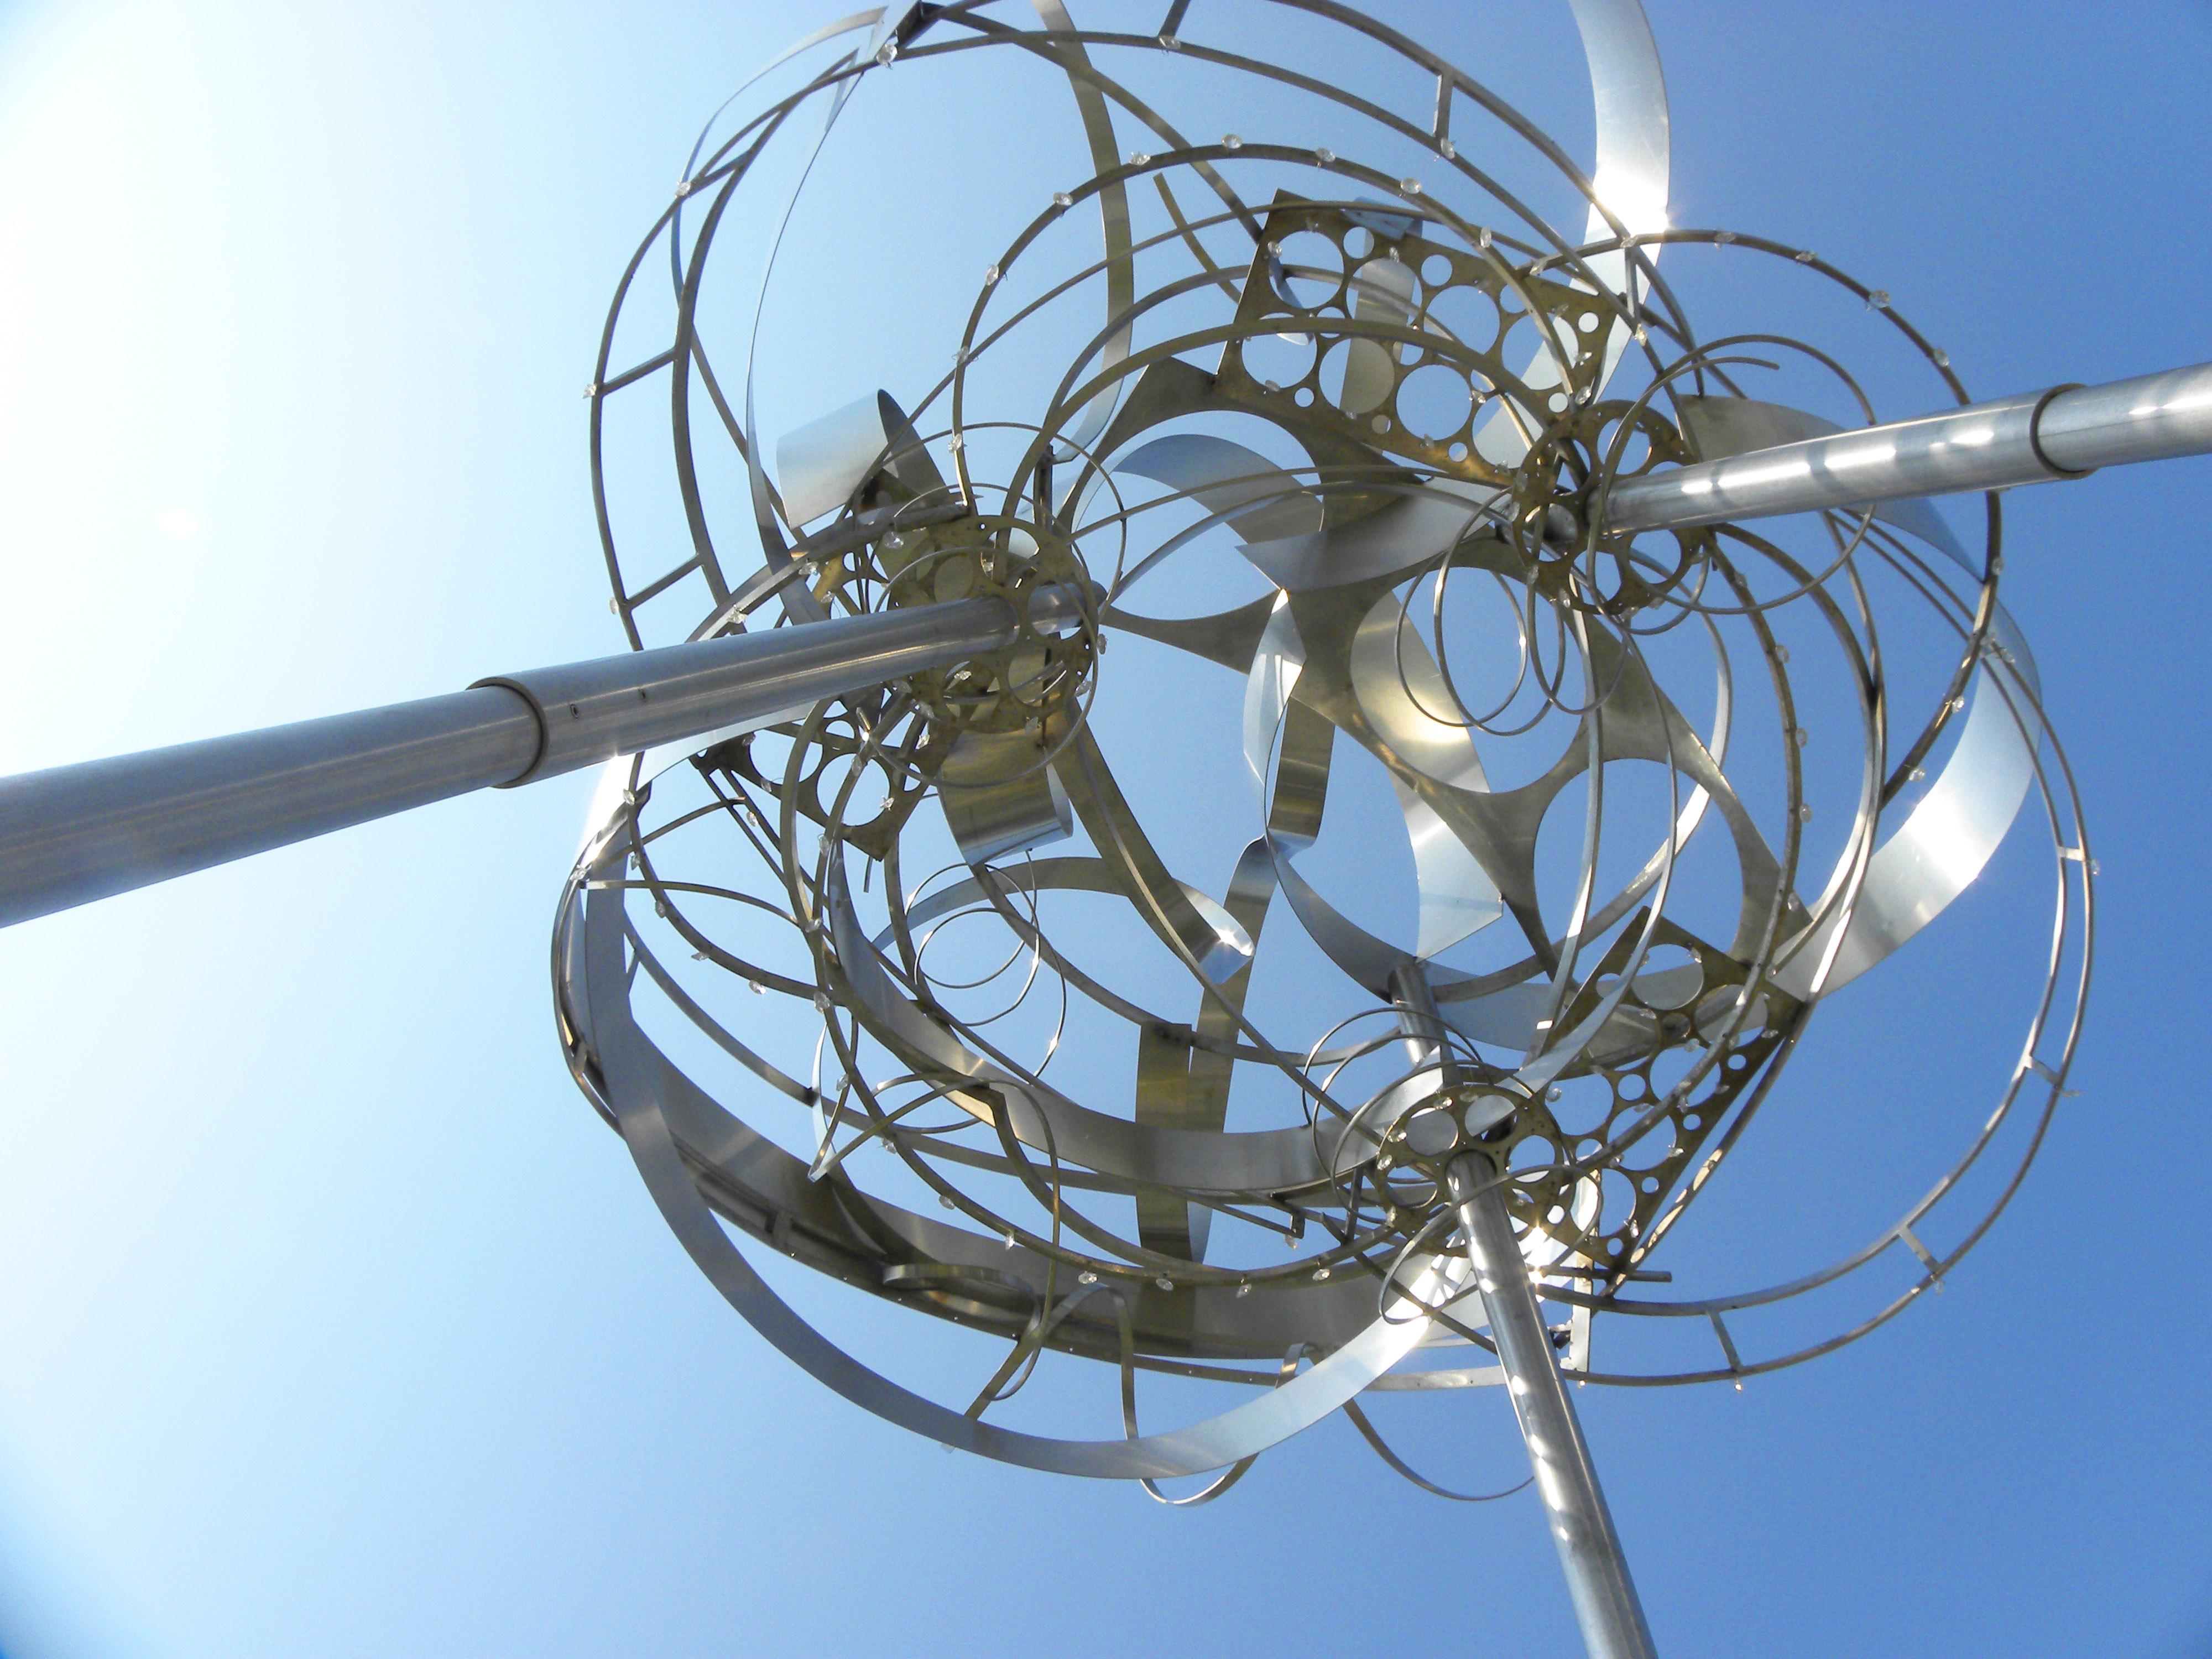 Cumulus III - large, tall outdoor cloud shaped stainless steel sculpture - Abstract Sculpture by Ania Biczysko